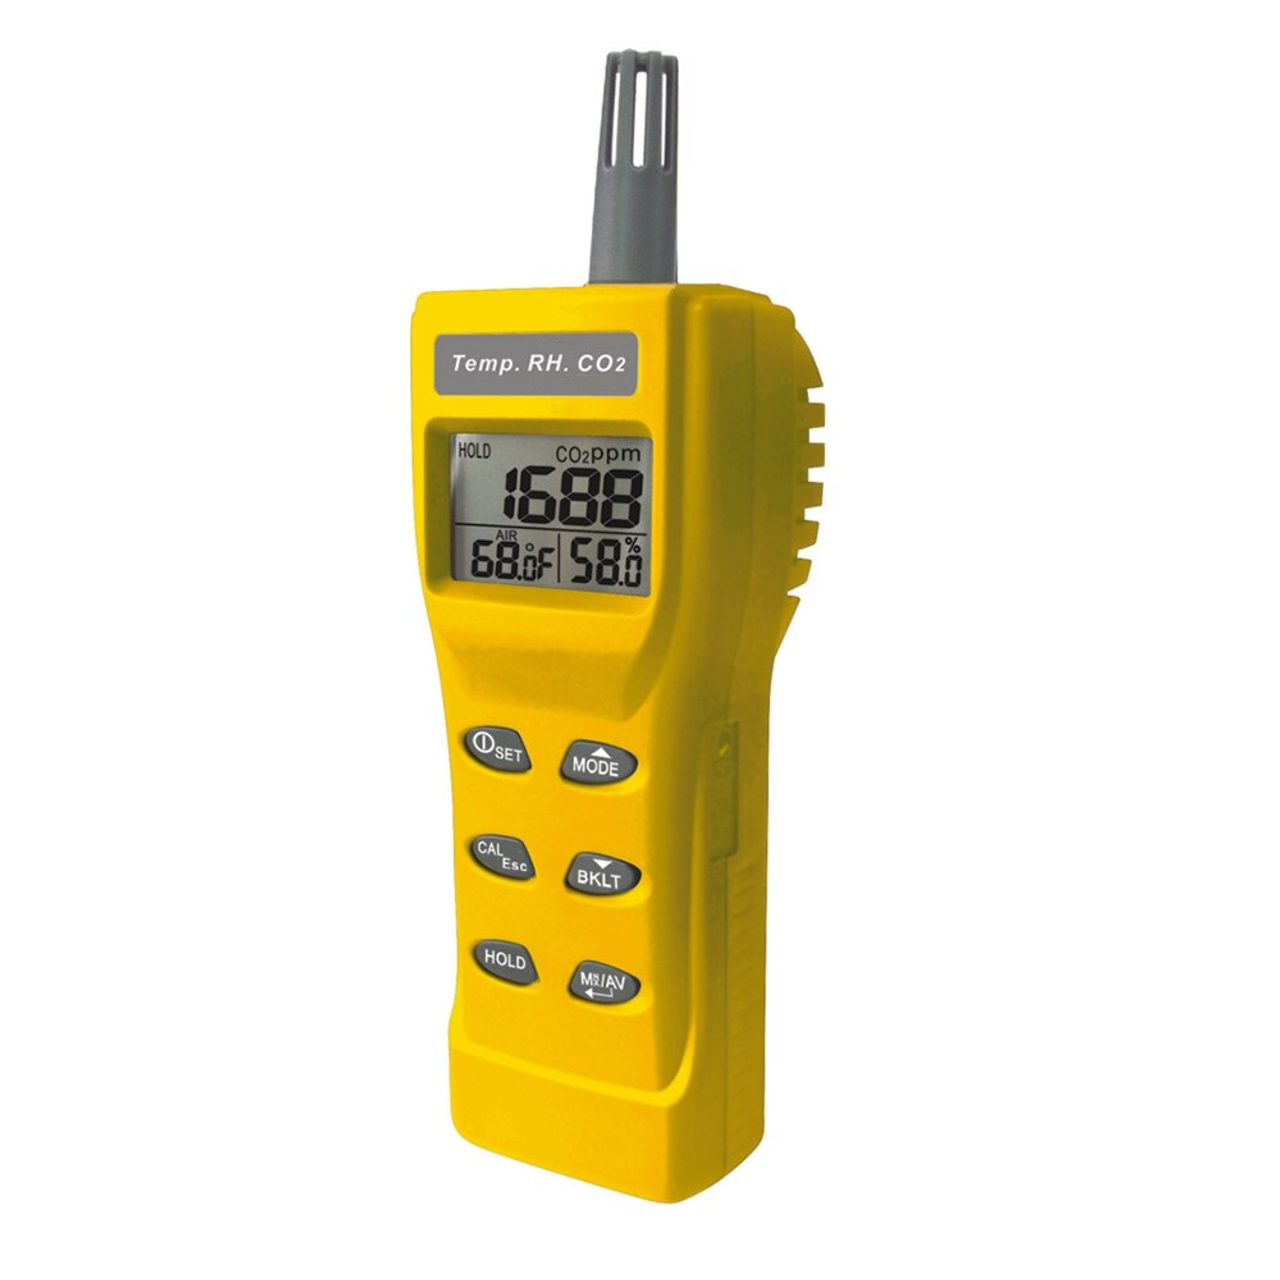 CO2 Detector Meter Measure CO2, Temperature and Humidity for